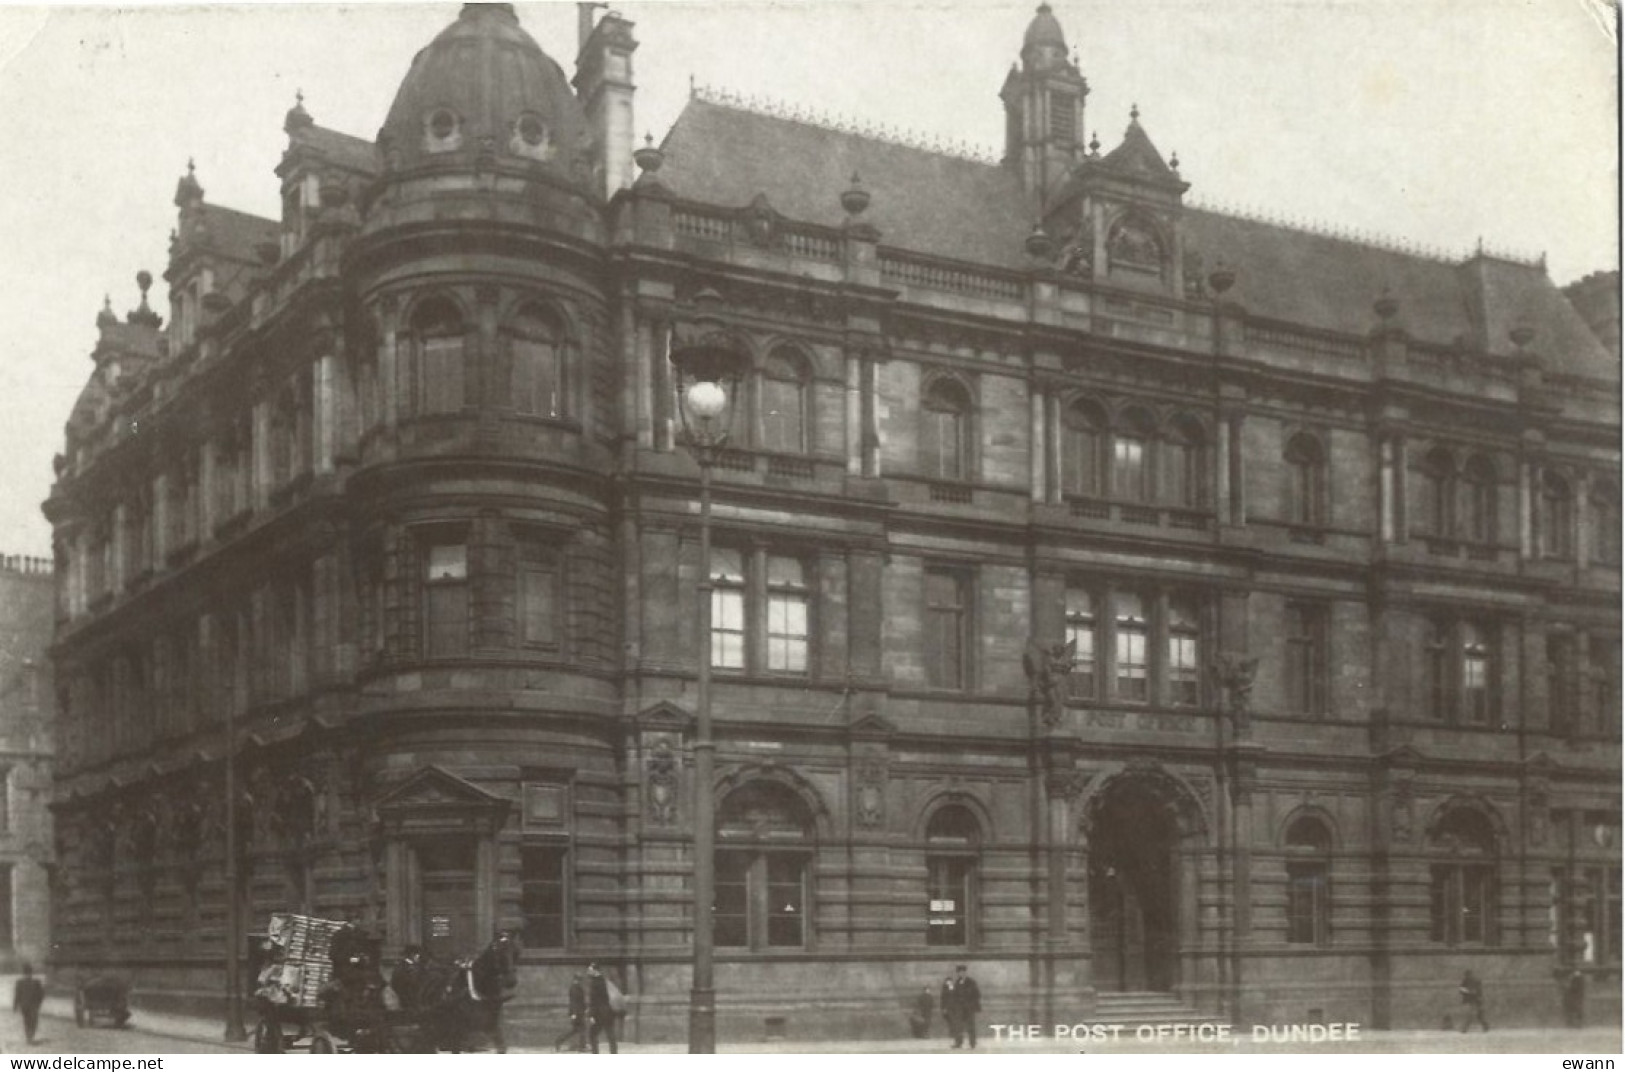 Ecosse - CPA - The Post Office, Dundee - Angus